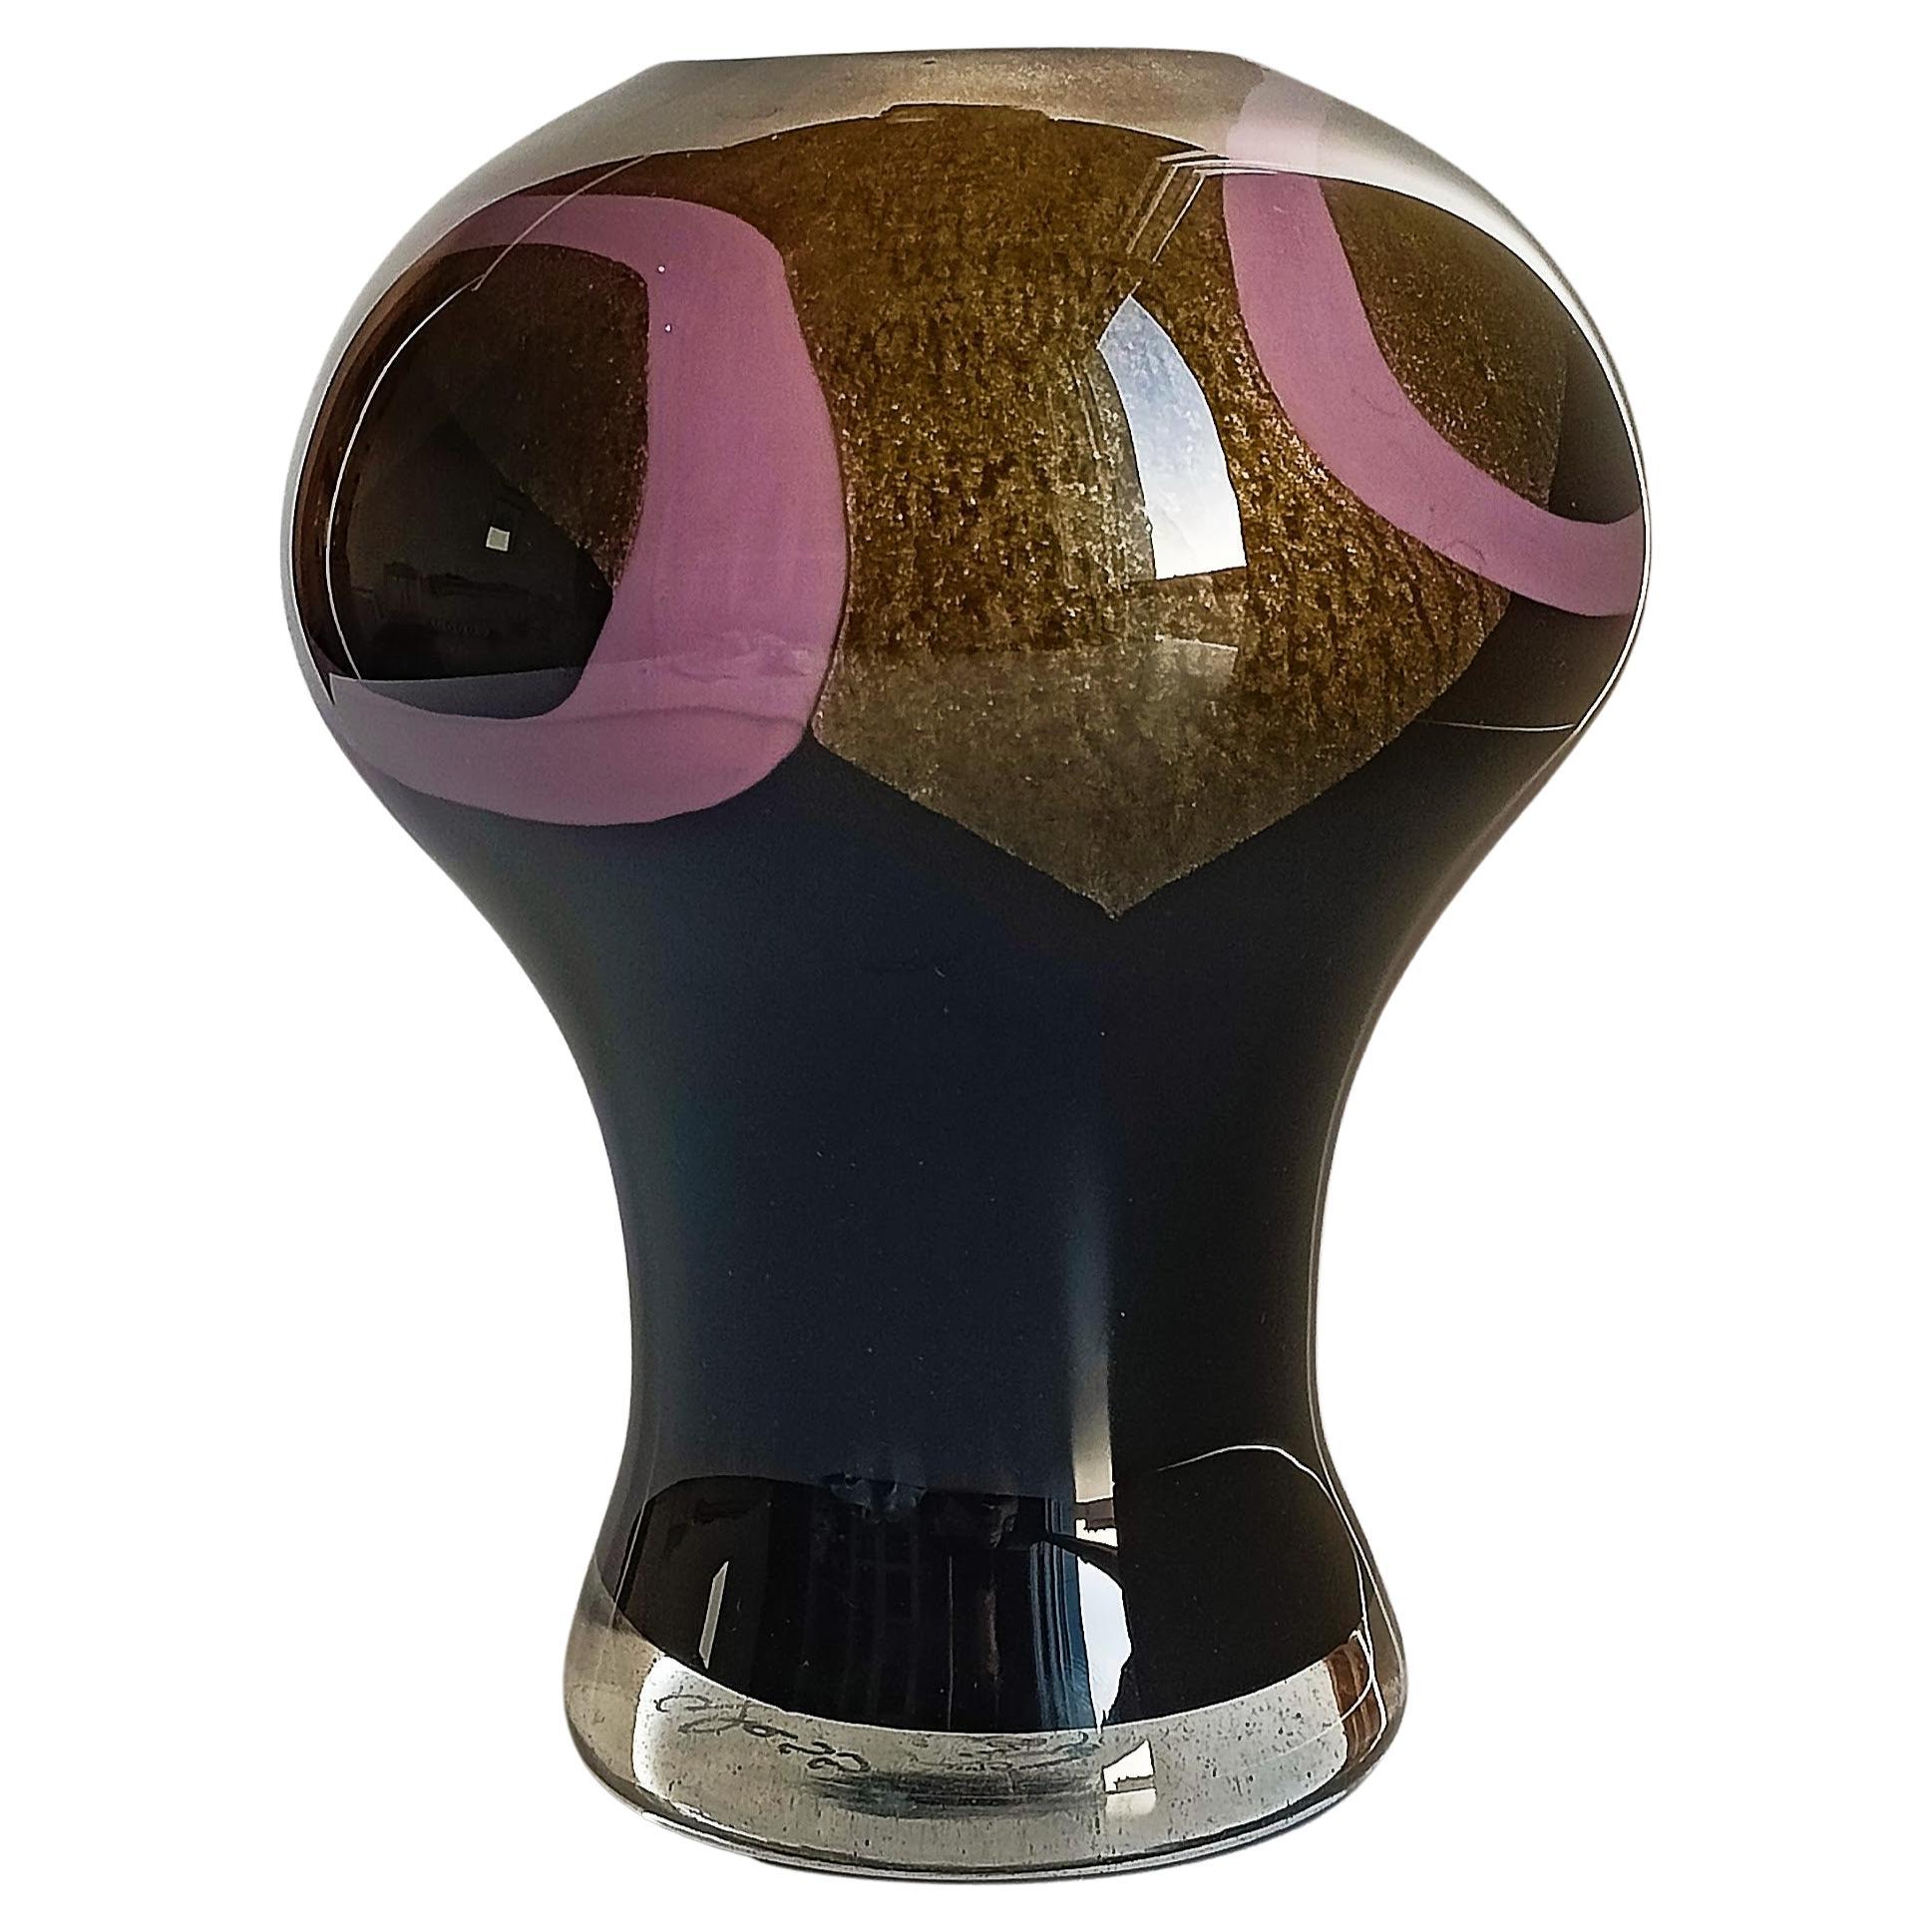 Art Glass Art Deco Jean Dunand Style Murano Glass Vase Signed Cose Belle Cose Rare For Sale